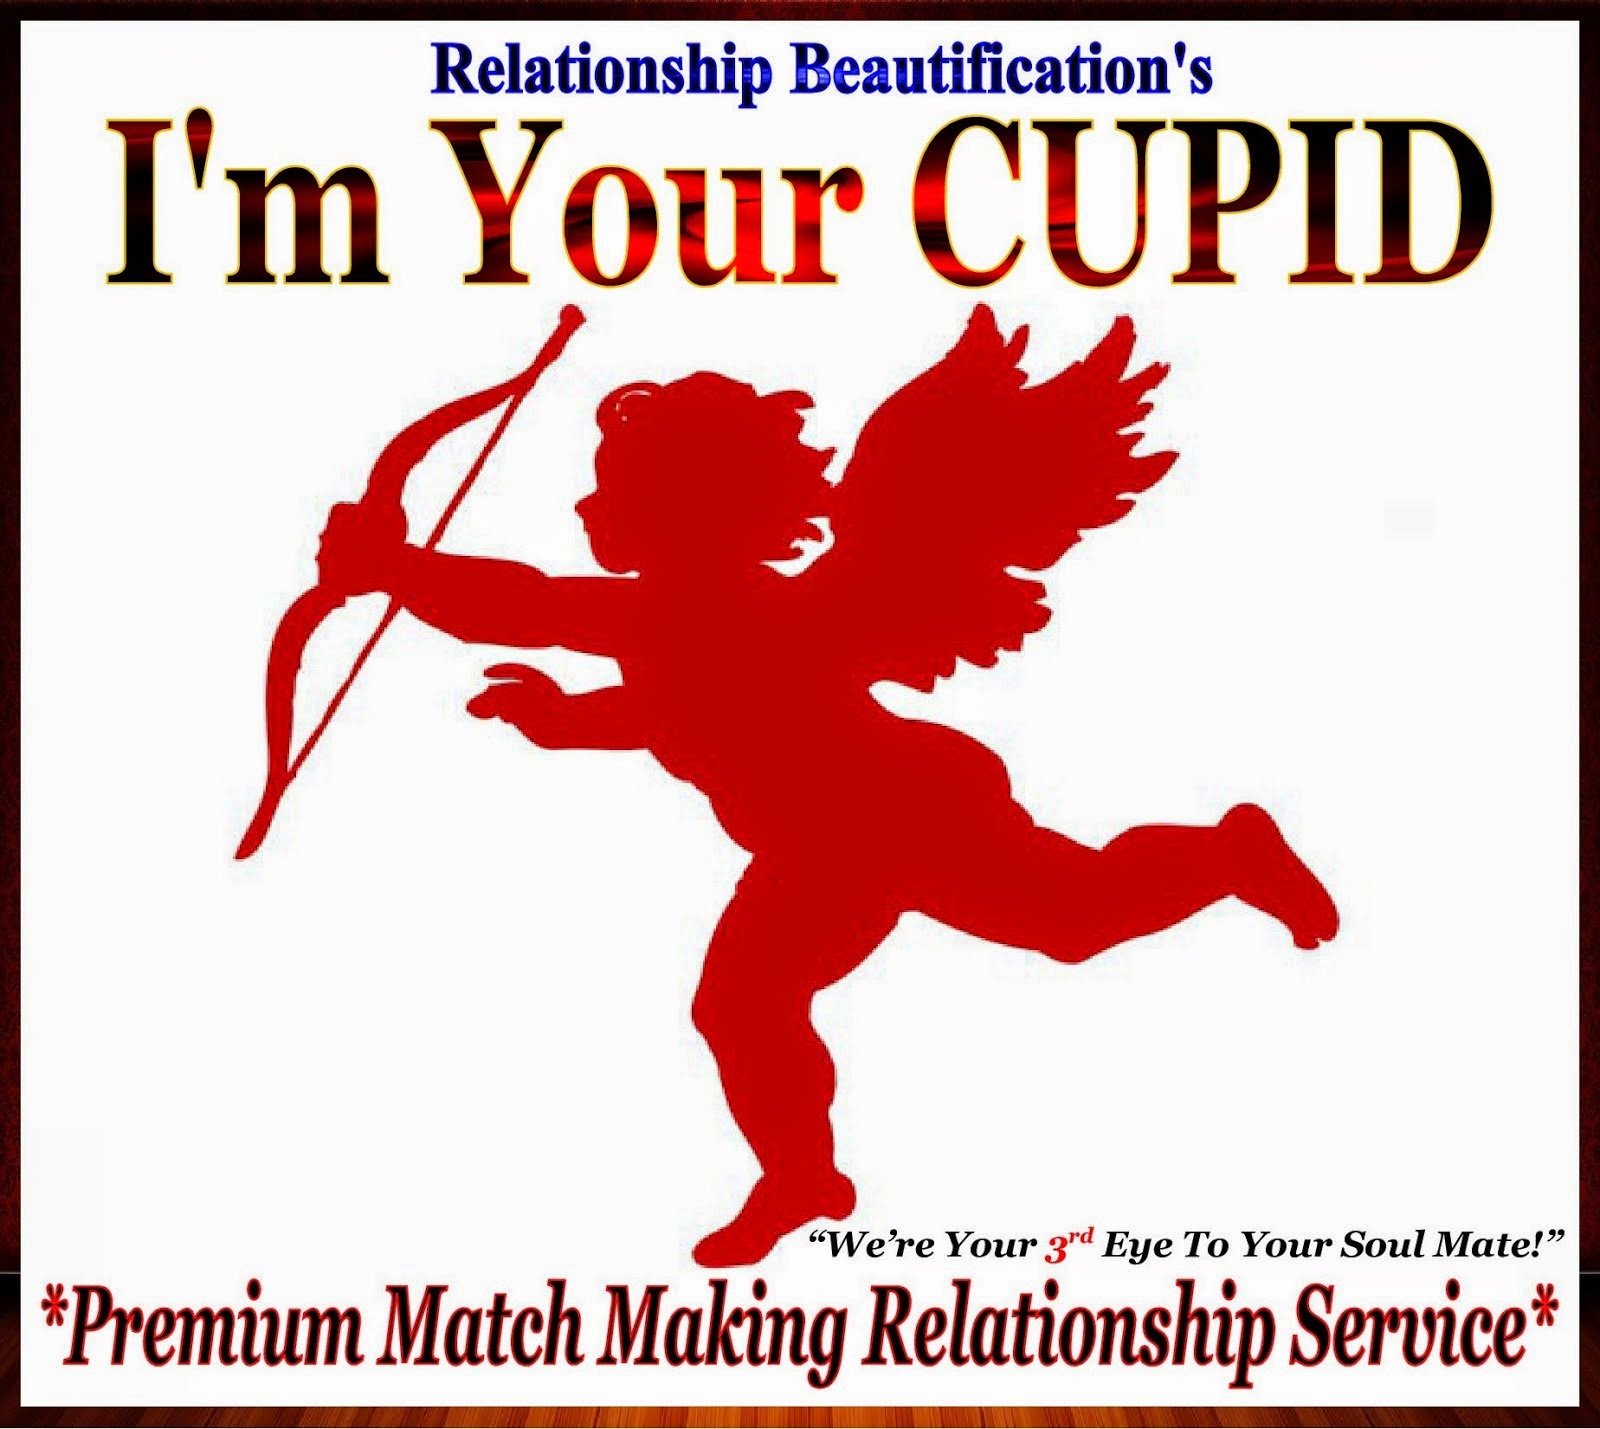 I'm Your CUPID